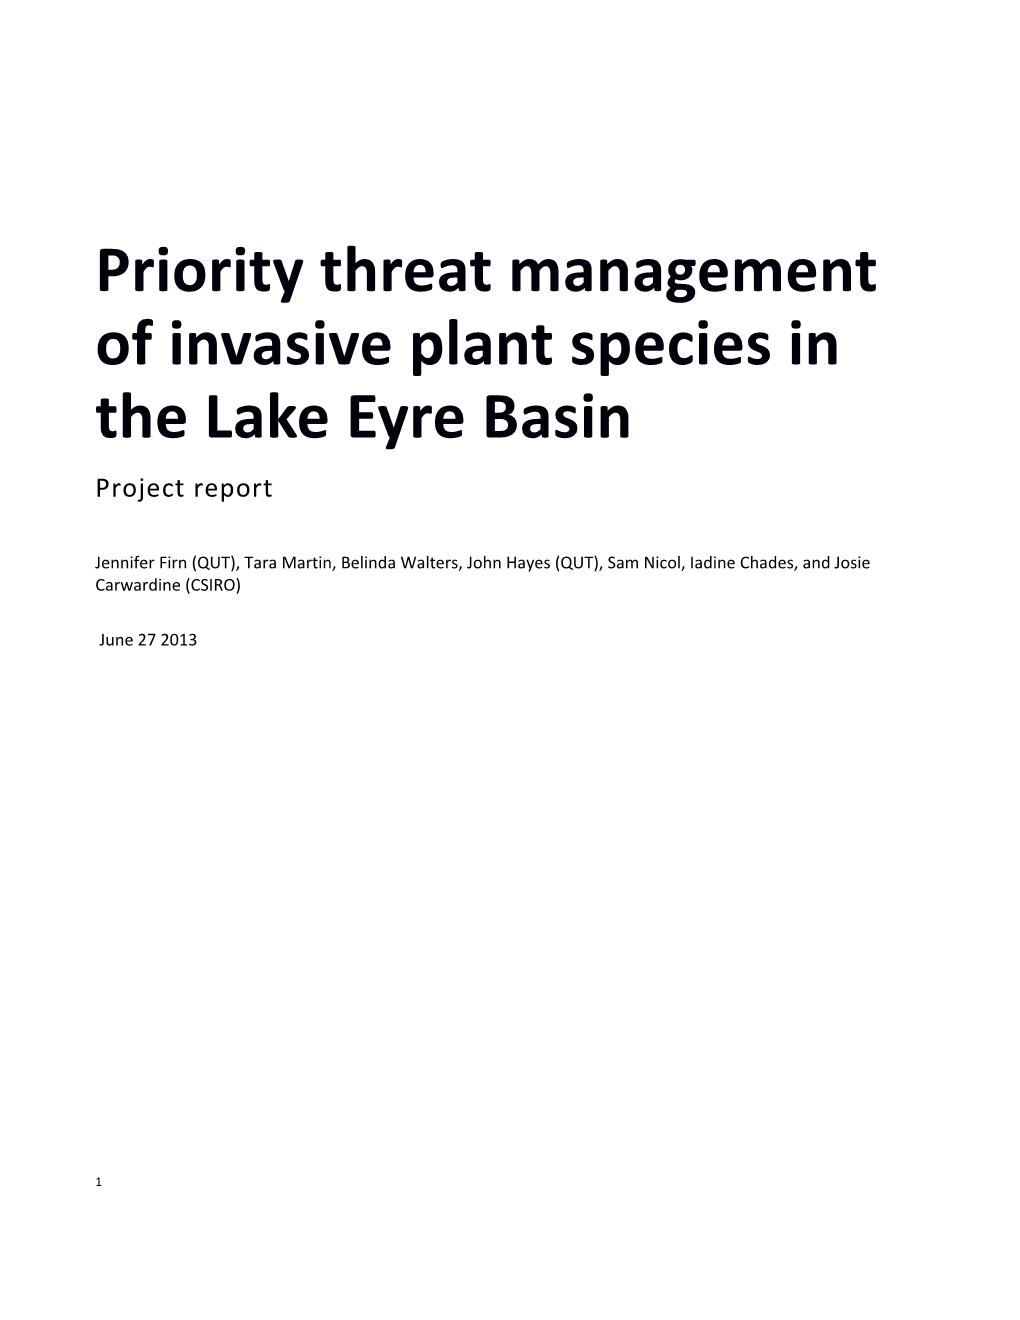 Priority Threat Management of Invasive Plant Species in the Lake Eyre Basin: Project Report